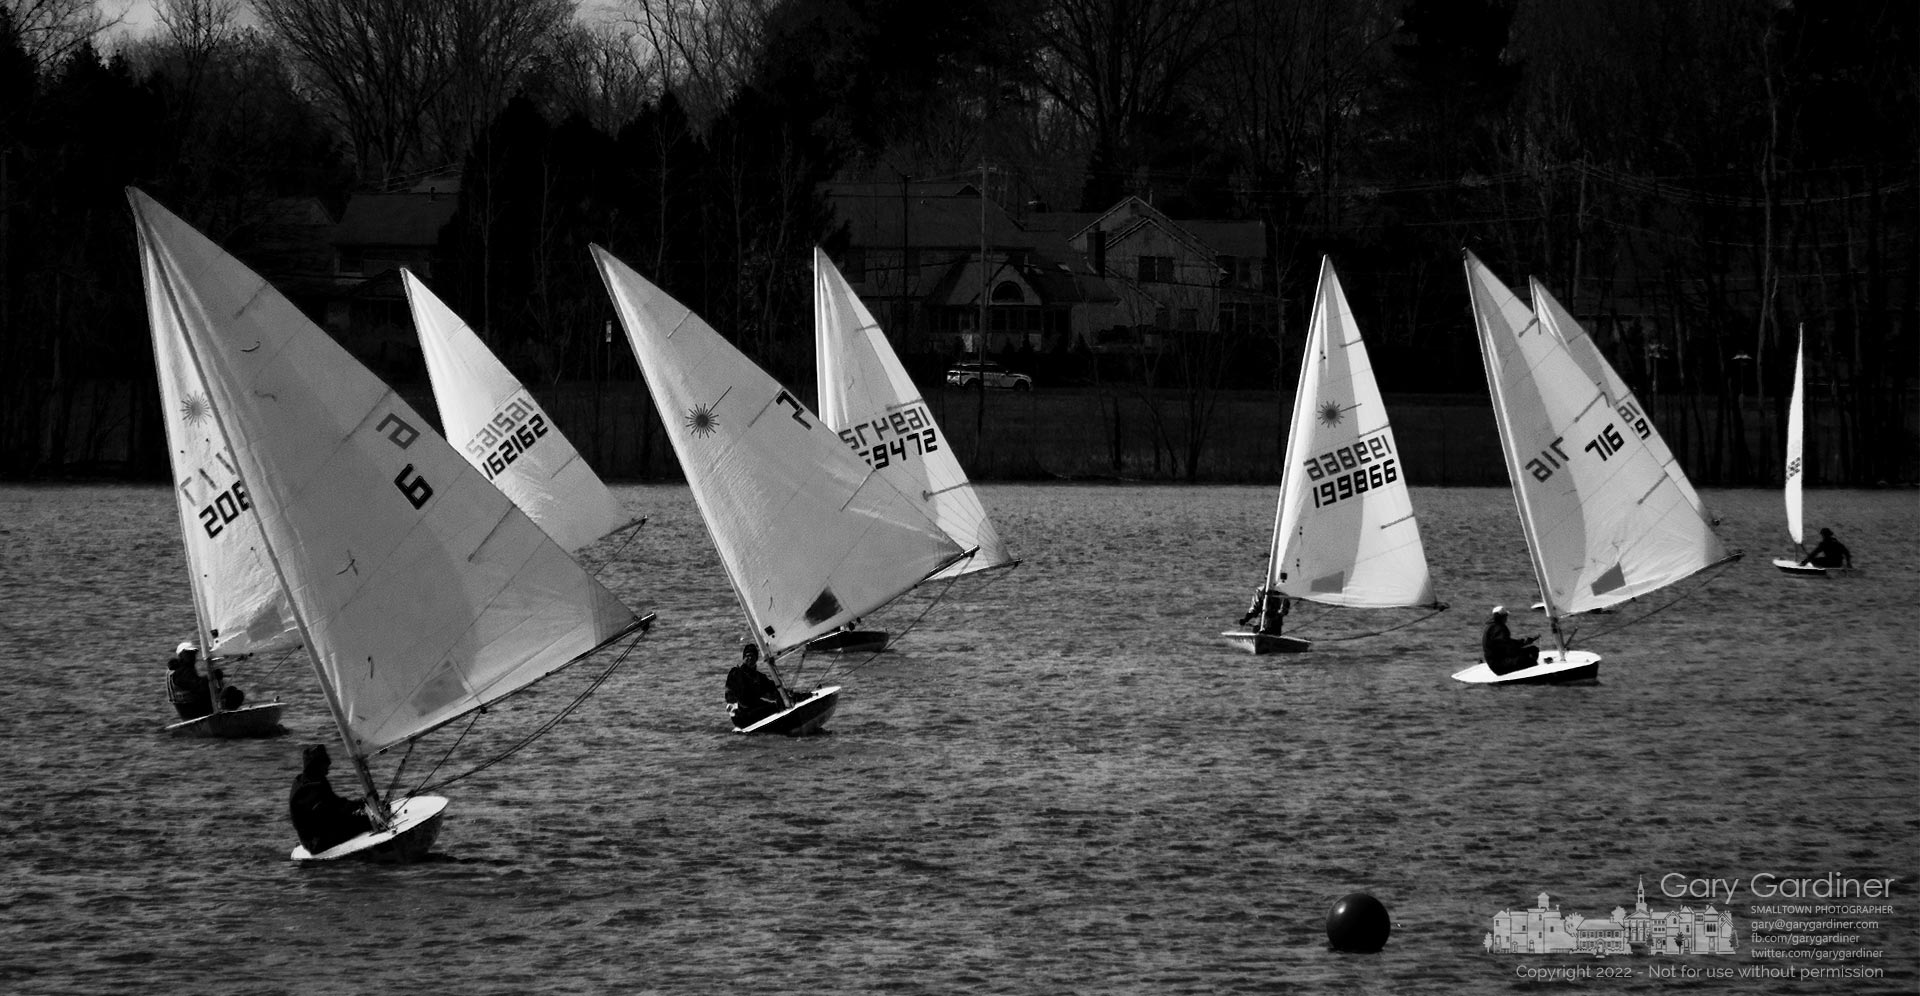 Sailors on Hoover Reservoir run with the wind as they approach a buoy marking a turn in one of their friendly races Sunday afternoon on the lake. My Final Photo for March 20, 2022.